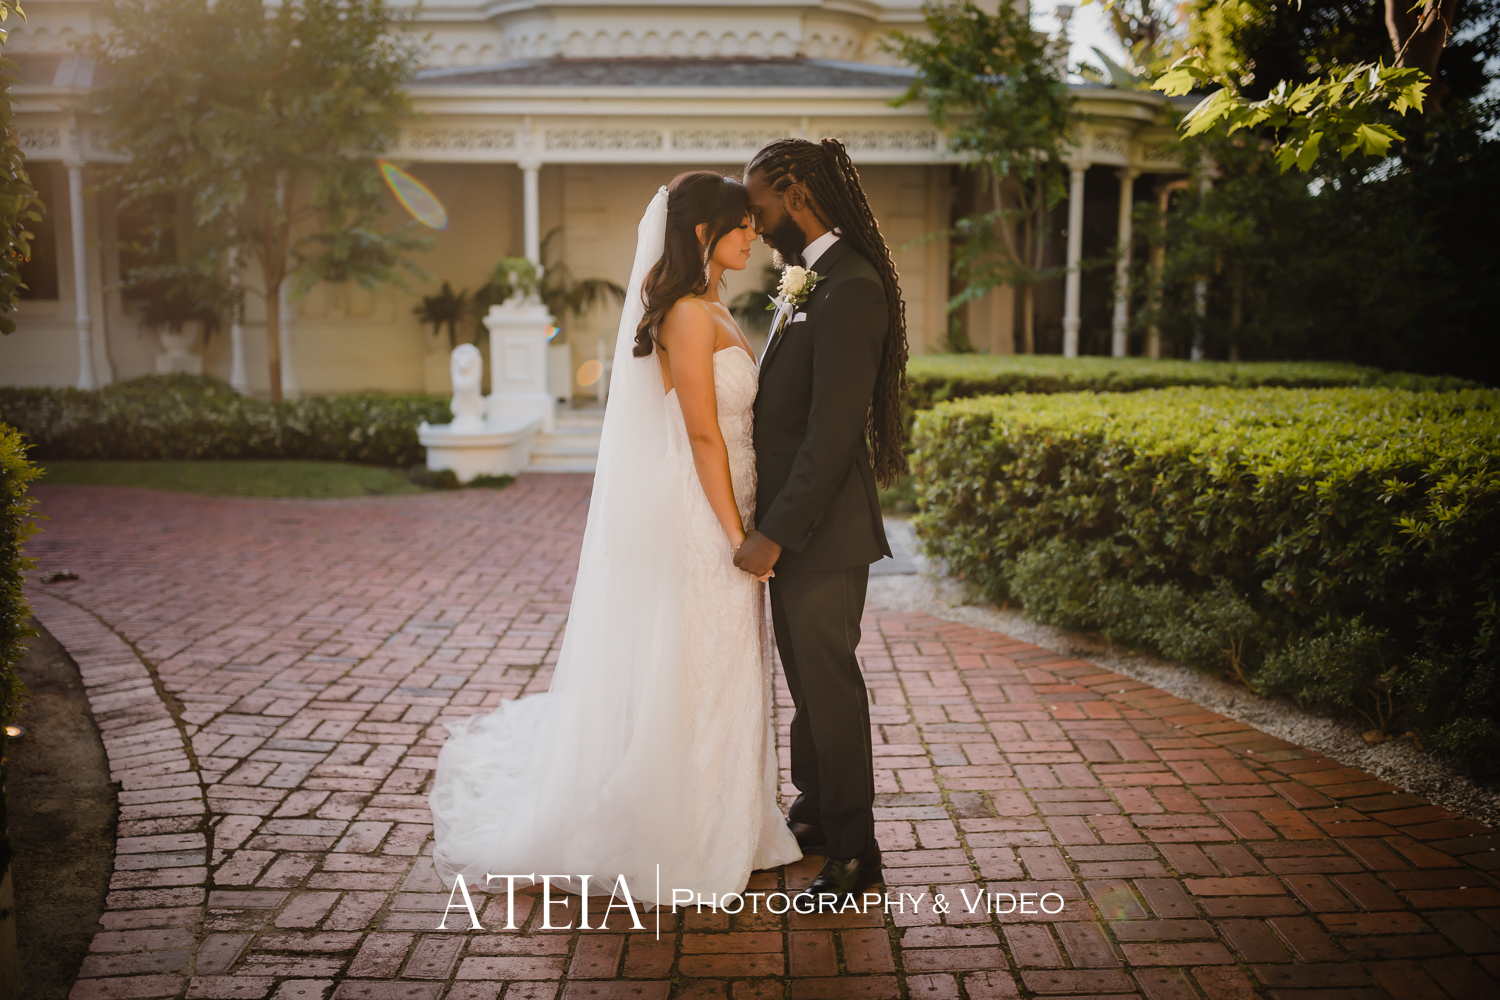 , Dima and Derrick&#8217;s wedding photography at Quat Quatta captured by ATEIA Photography &#038; Video